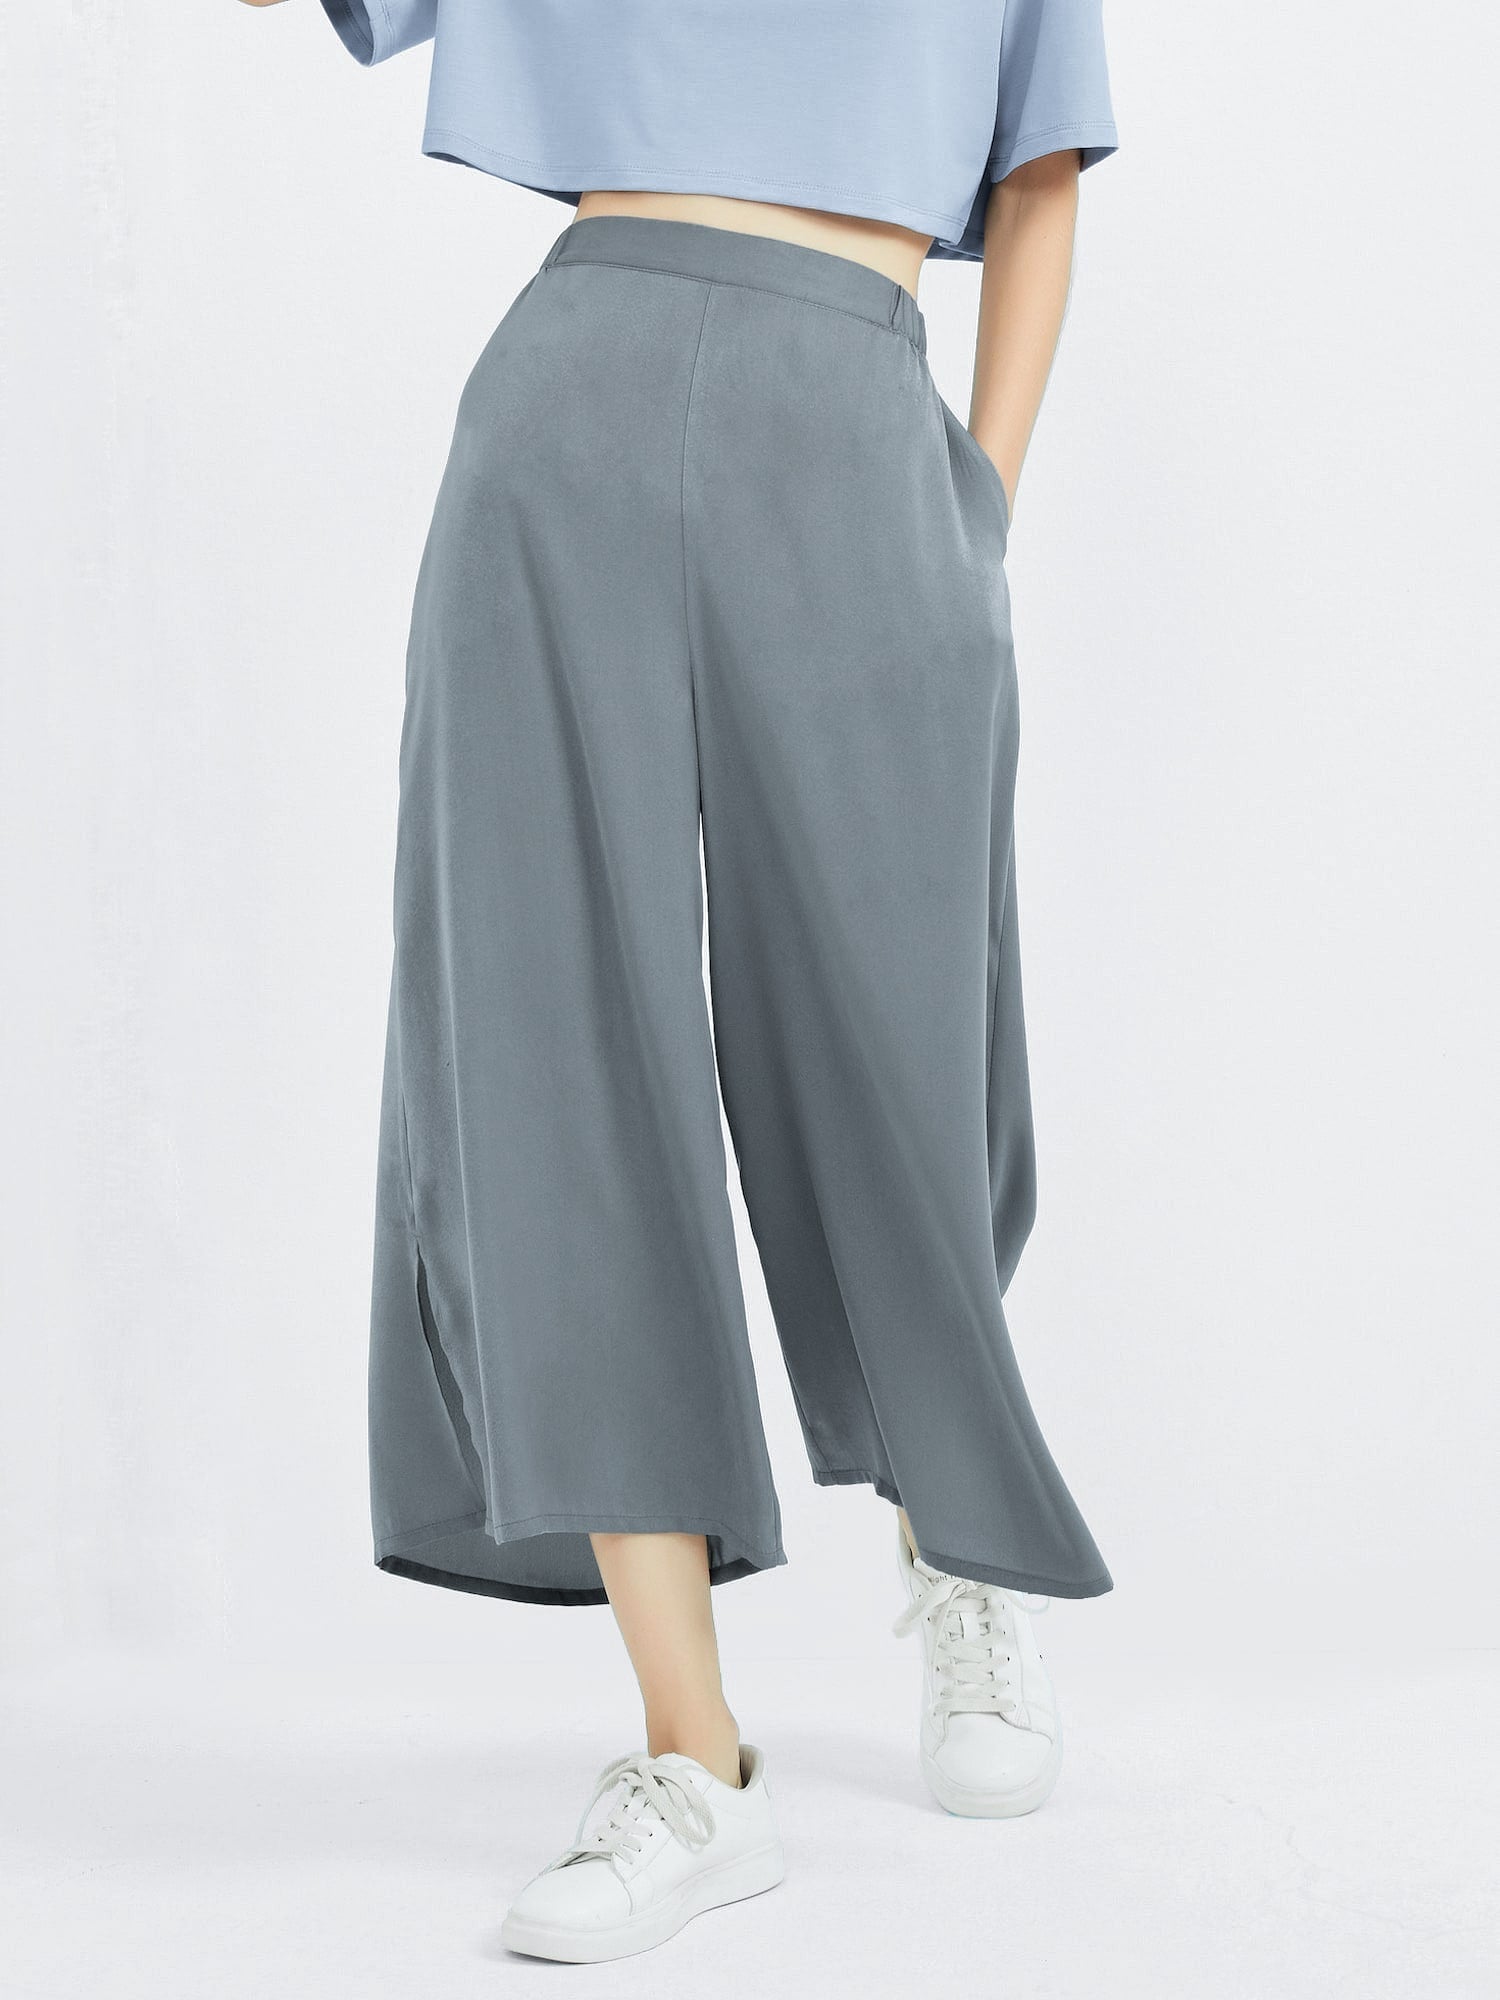 Everly Culotte Pant in Sand | Chello